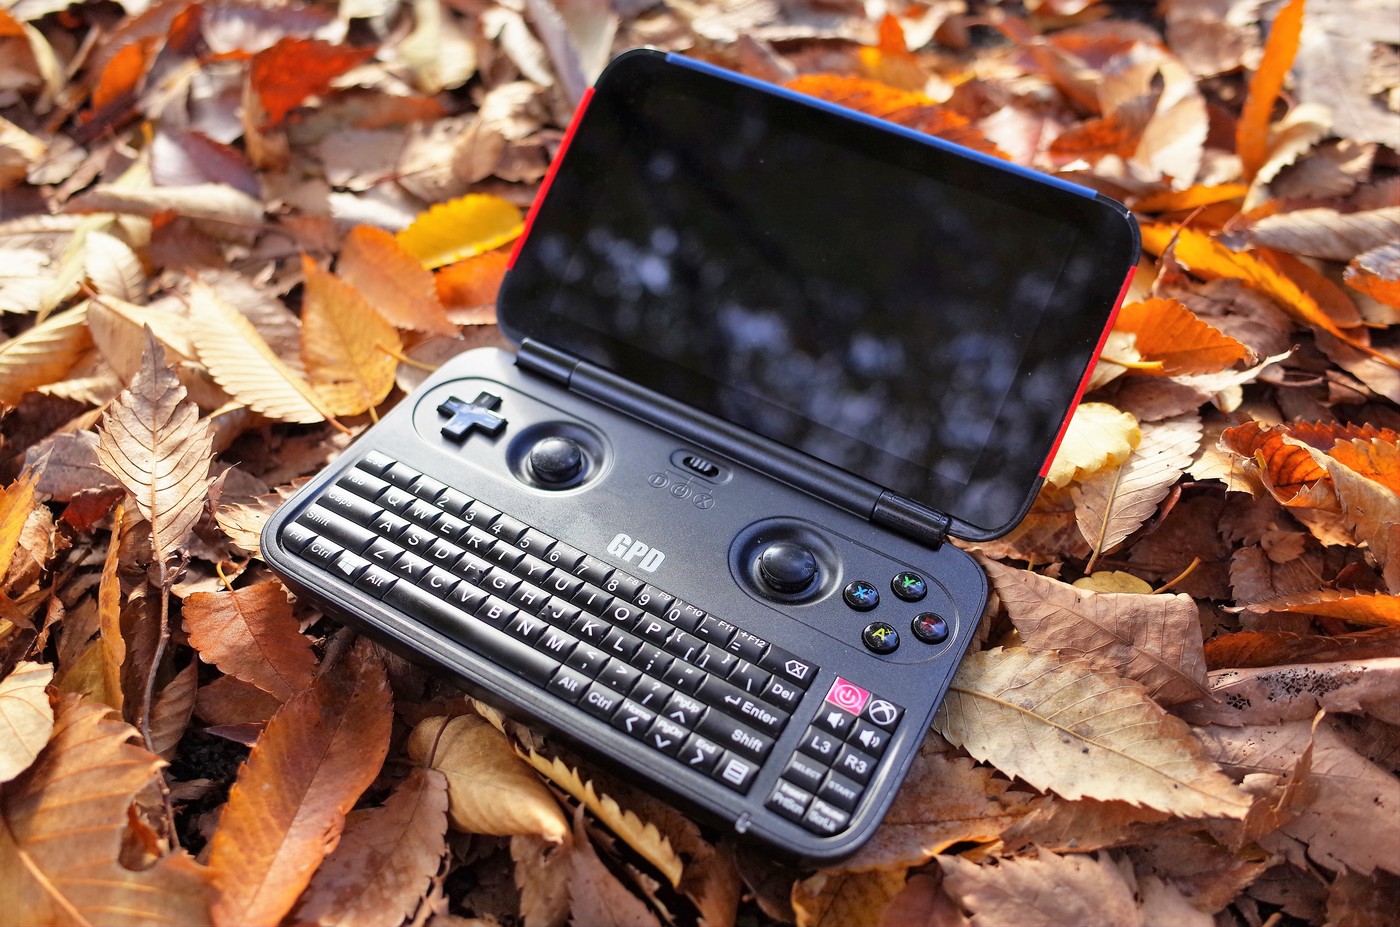 Latest bios 10252016 for gpd win can be downloaded 00006